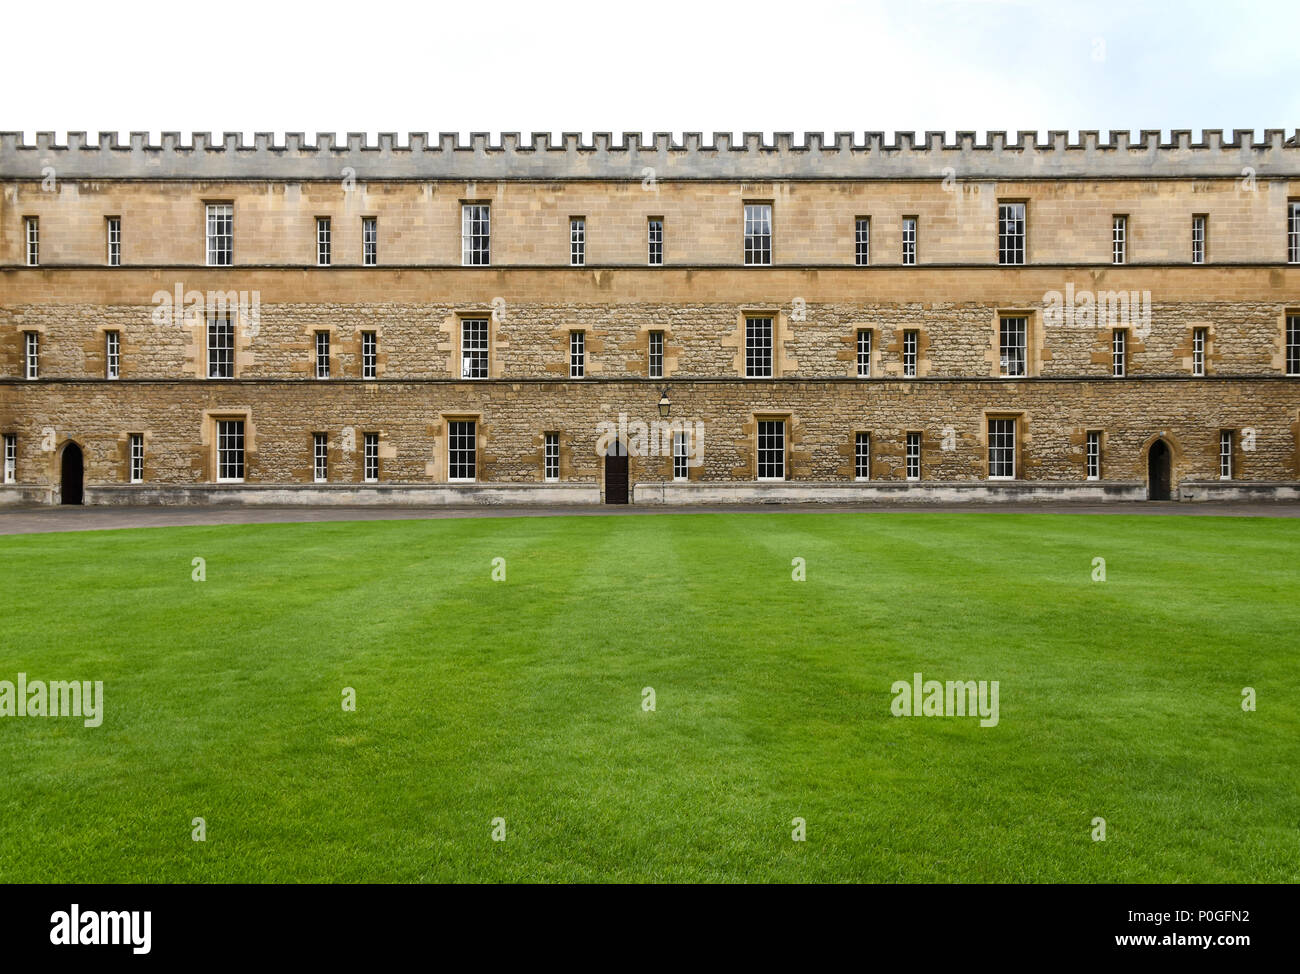 New College Oxford - Quad / Courtyard Lawn and Building Facade. UK. Stock Photo